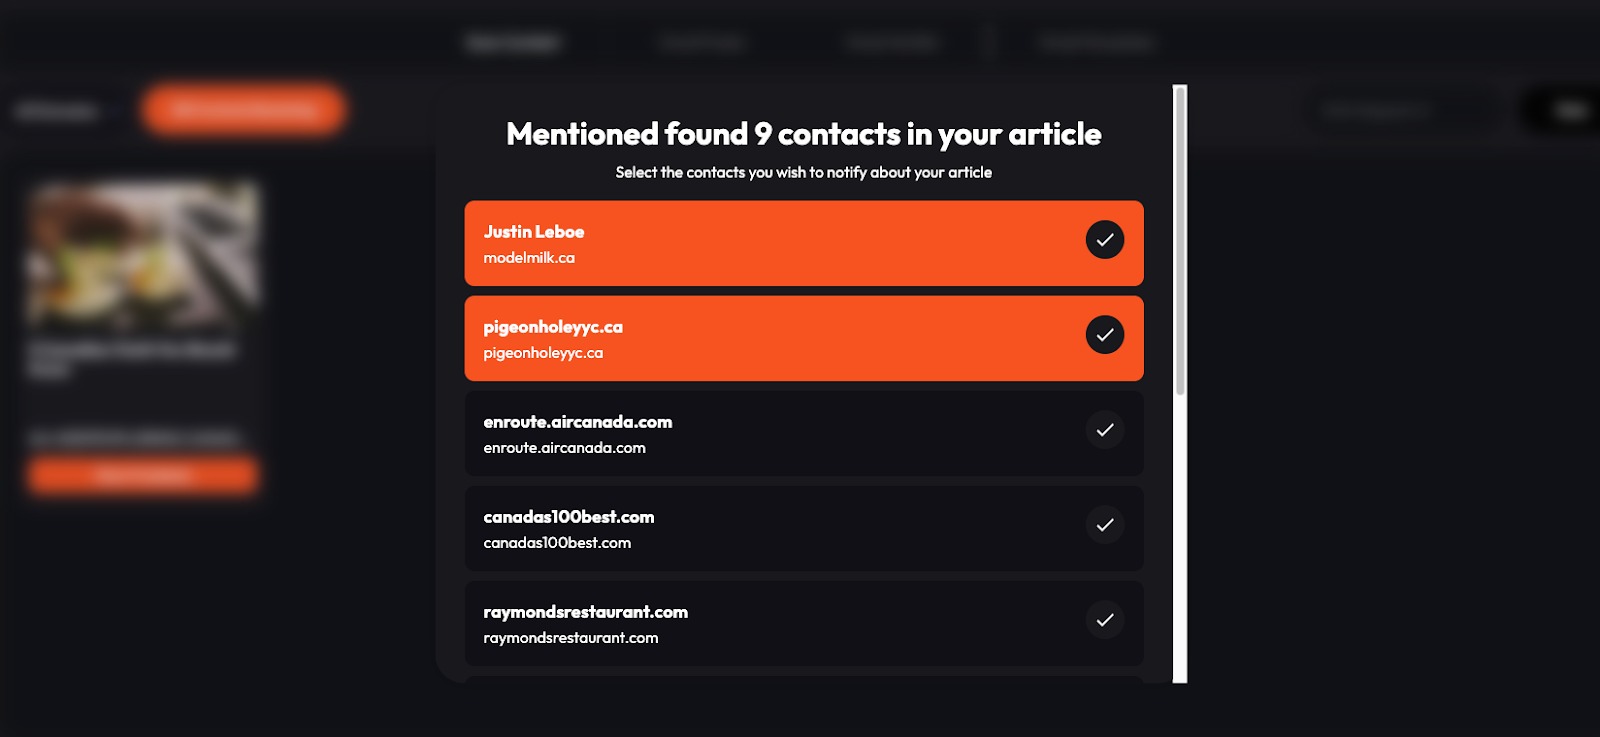 Mentioned - Outreach Wizard pulls contacts by scanning a published blog article.